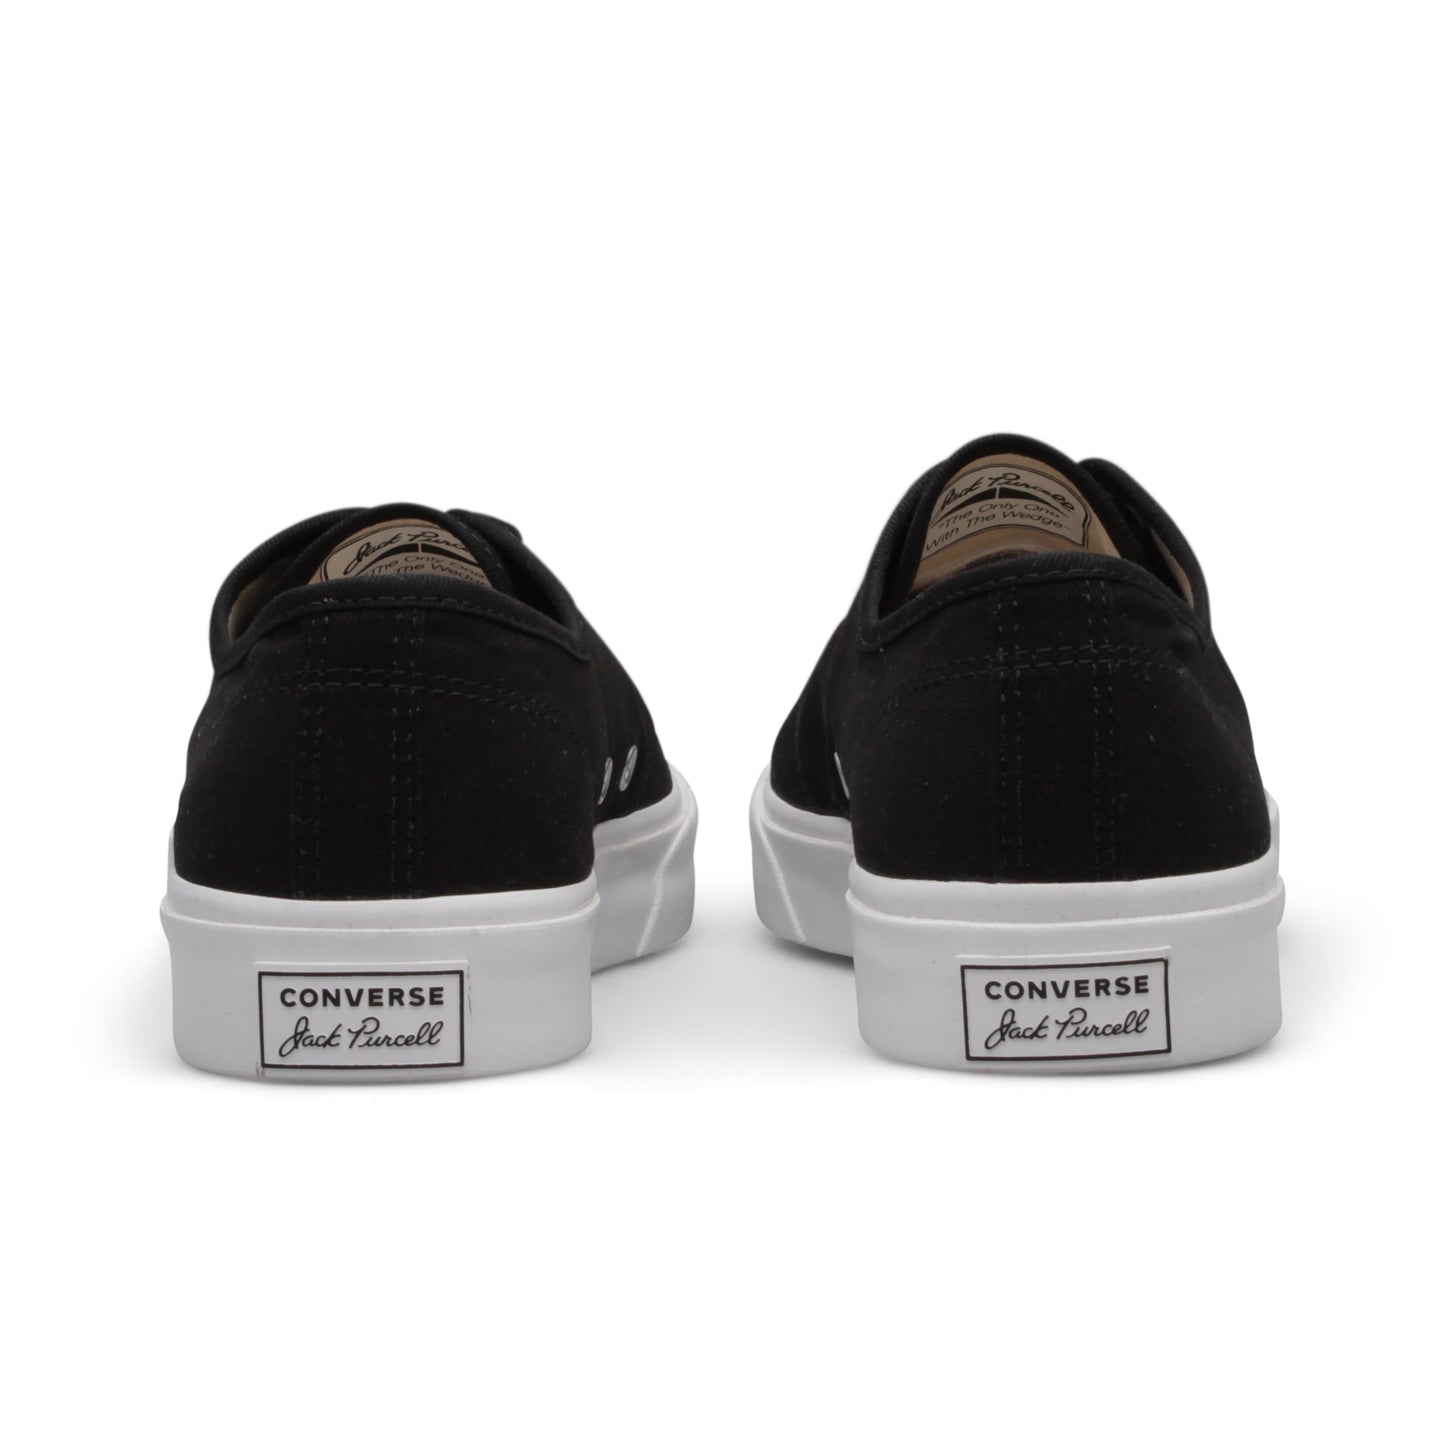 Converse Shoes JACK PURCELL OX